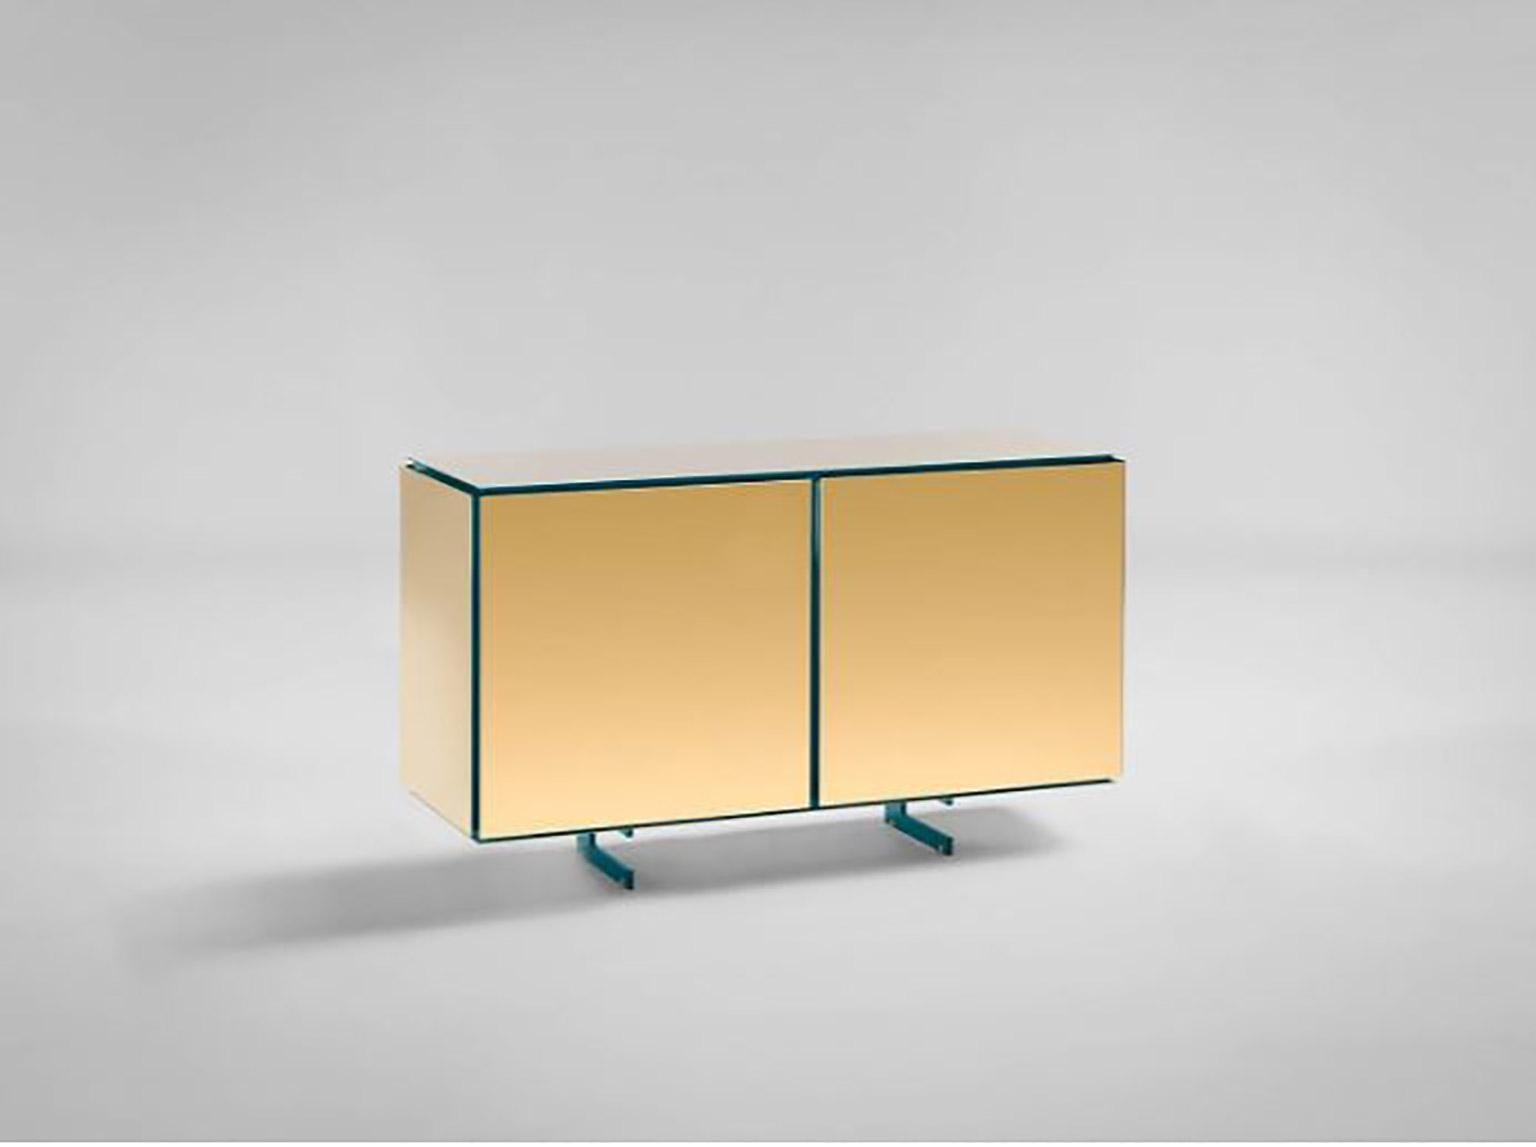 SEM Gold collection, two doors sideboard. Verdemare lacquered wooden structure, gloss finish. Available more colorway variants. External shell in 24-karat polished yellow gold-plated combined with ultra-reflective steel. The Gold collection has a